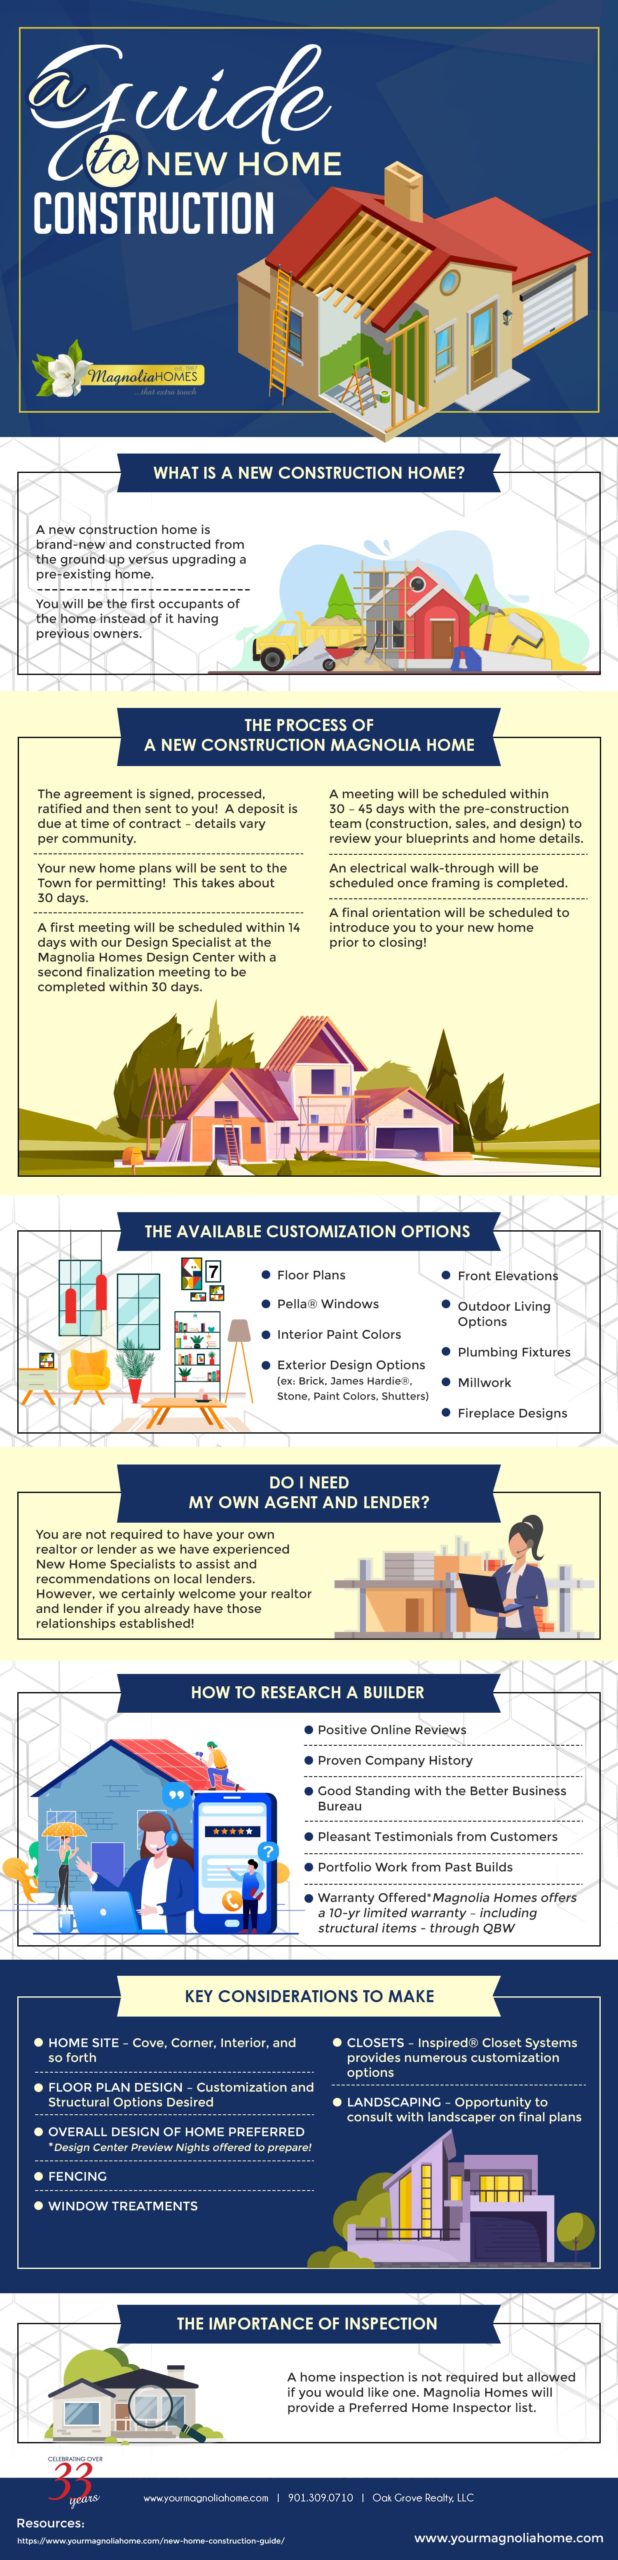 How to Buy a New Construction Home: A Guide for Beginners